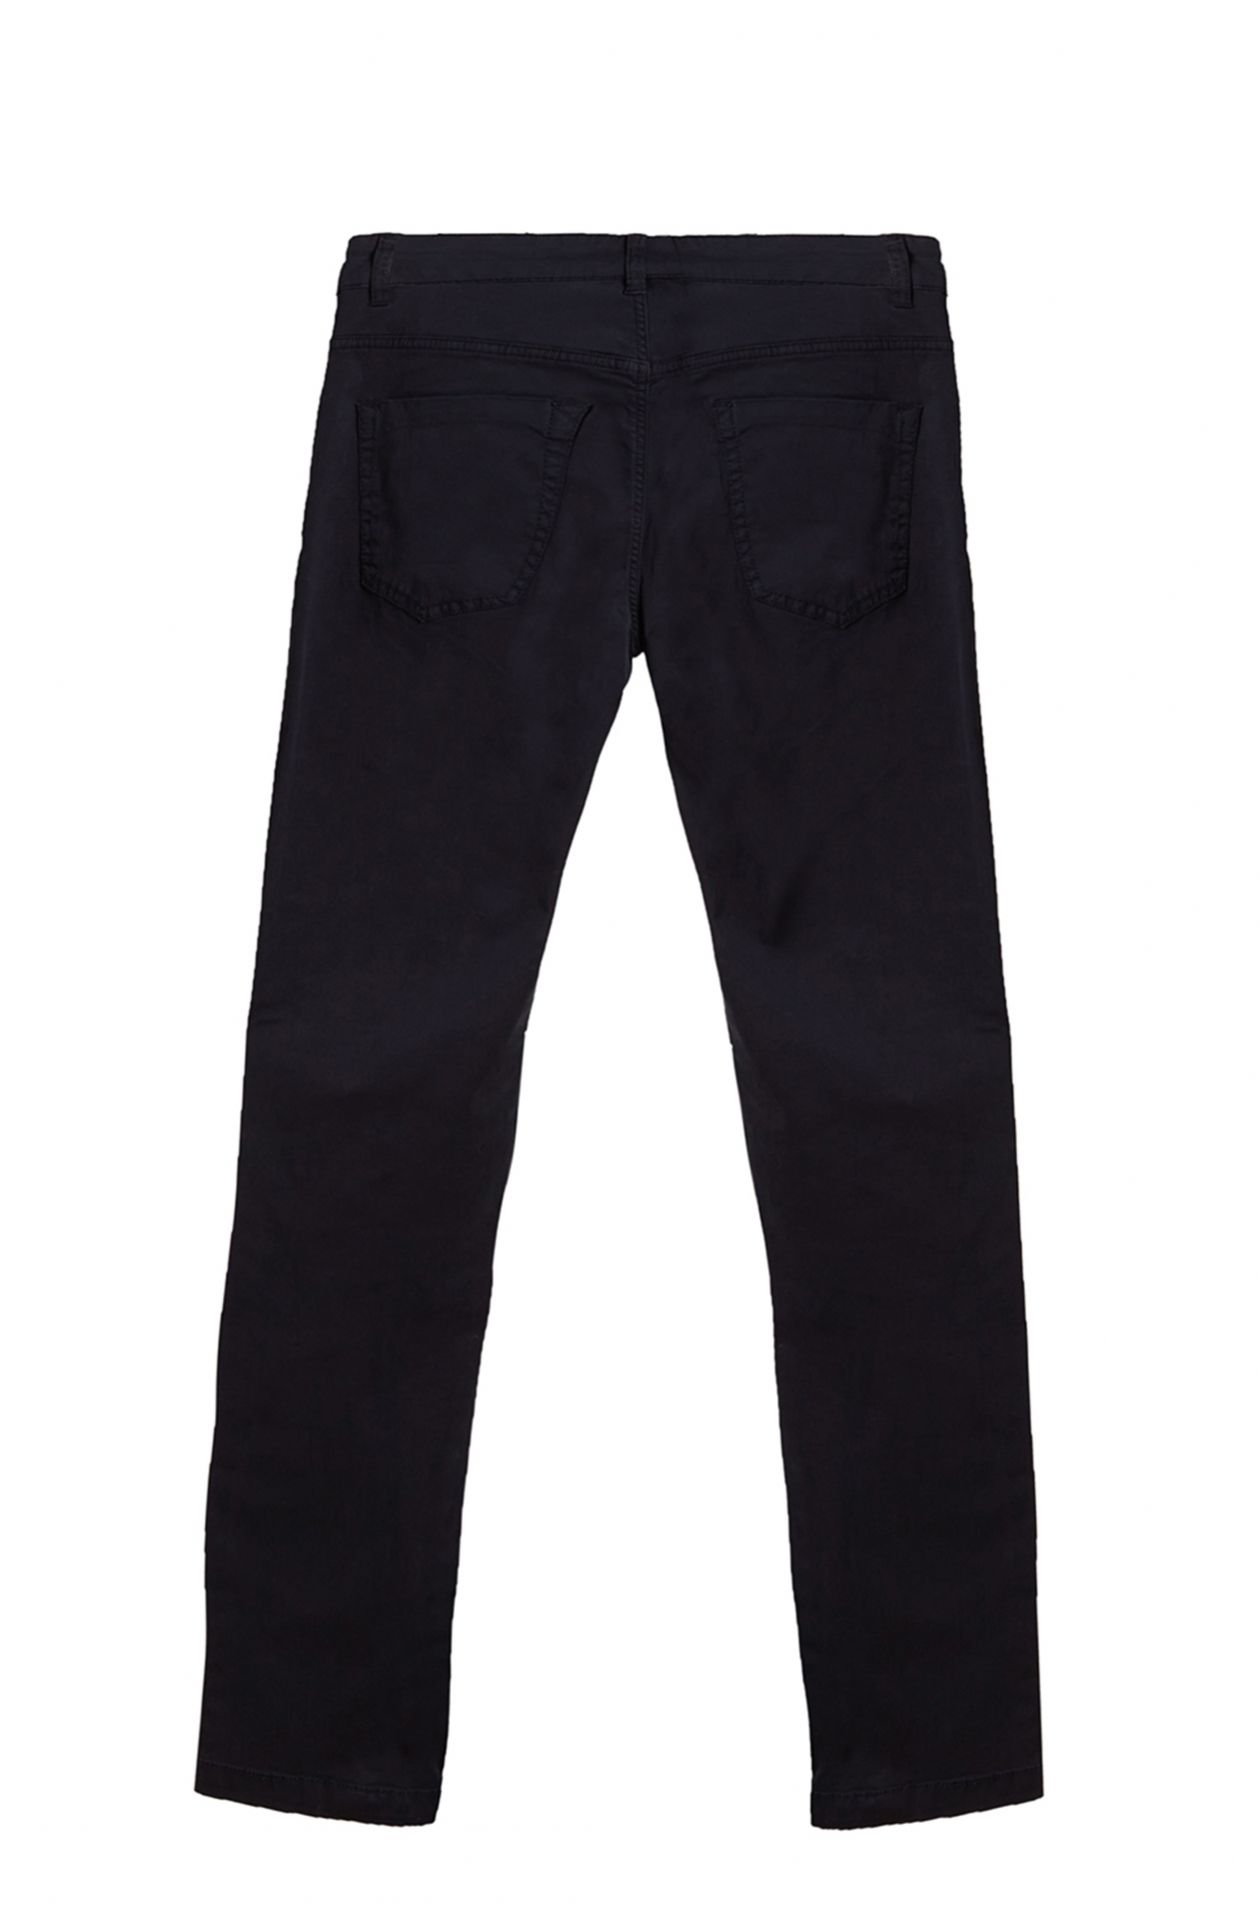 FIVE-POCKET TROUSERS